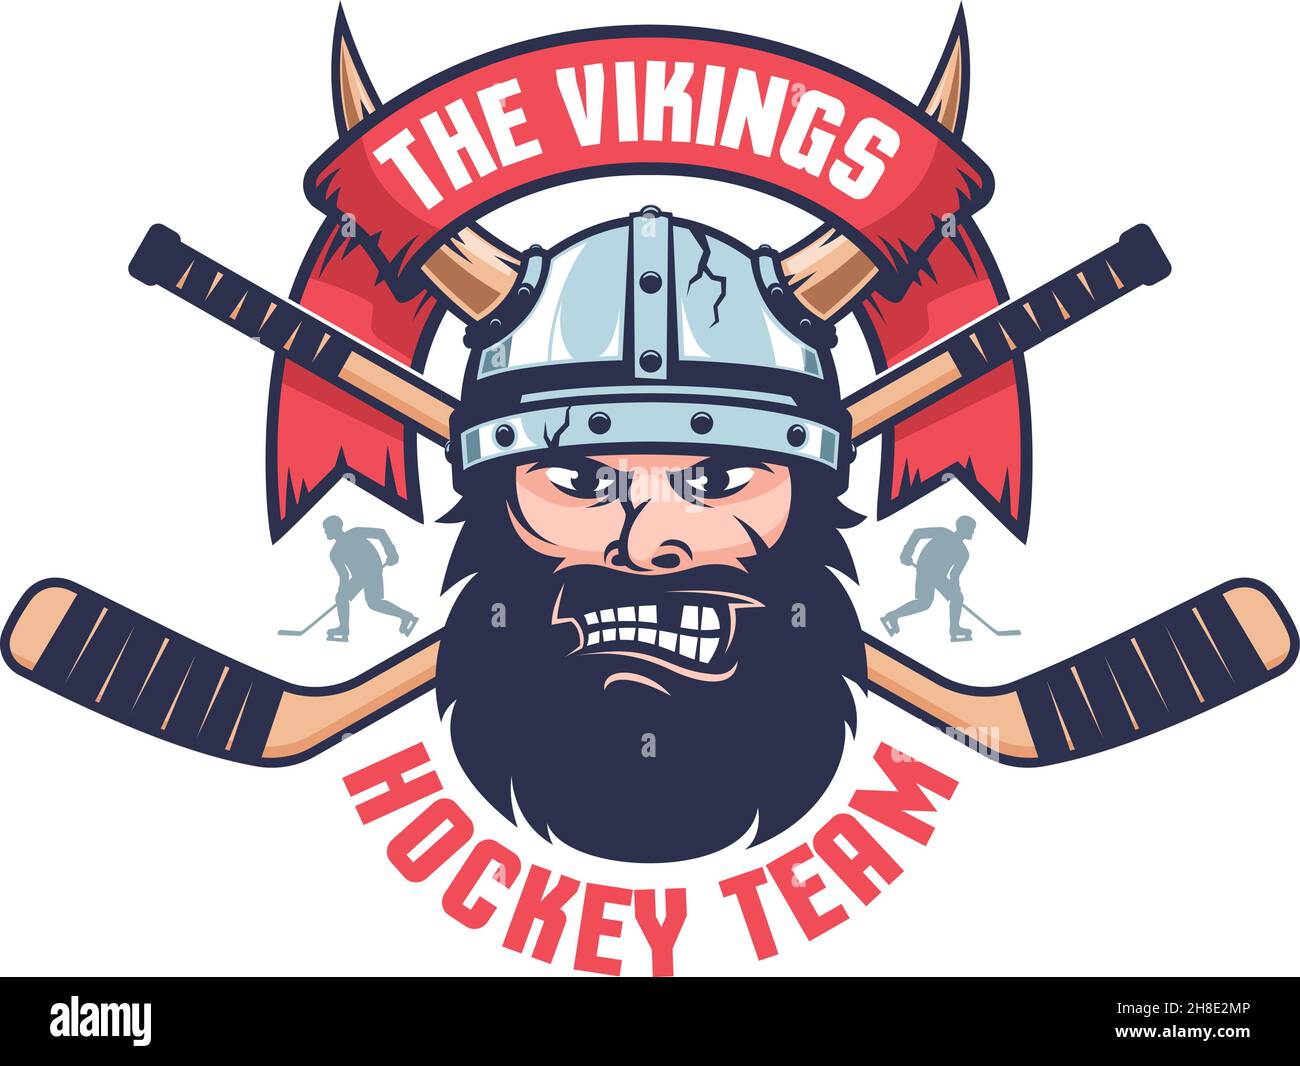 Hockey team emblem with Viking head and crossed sticks Stock Vector